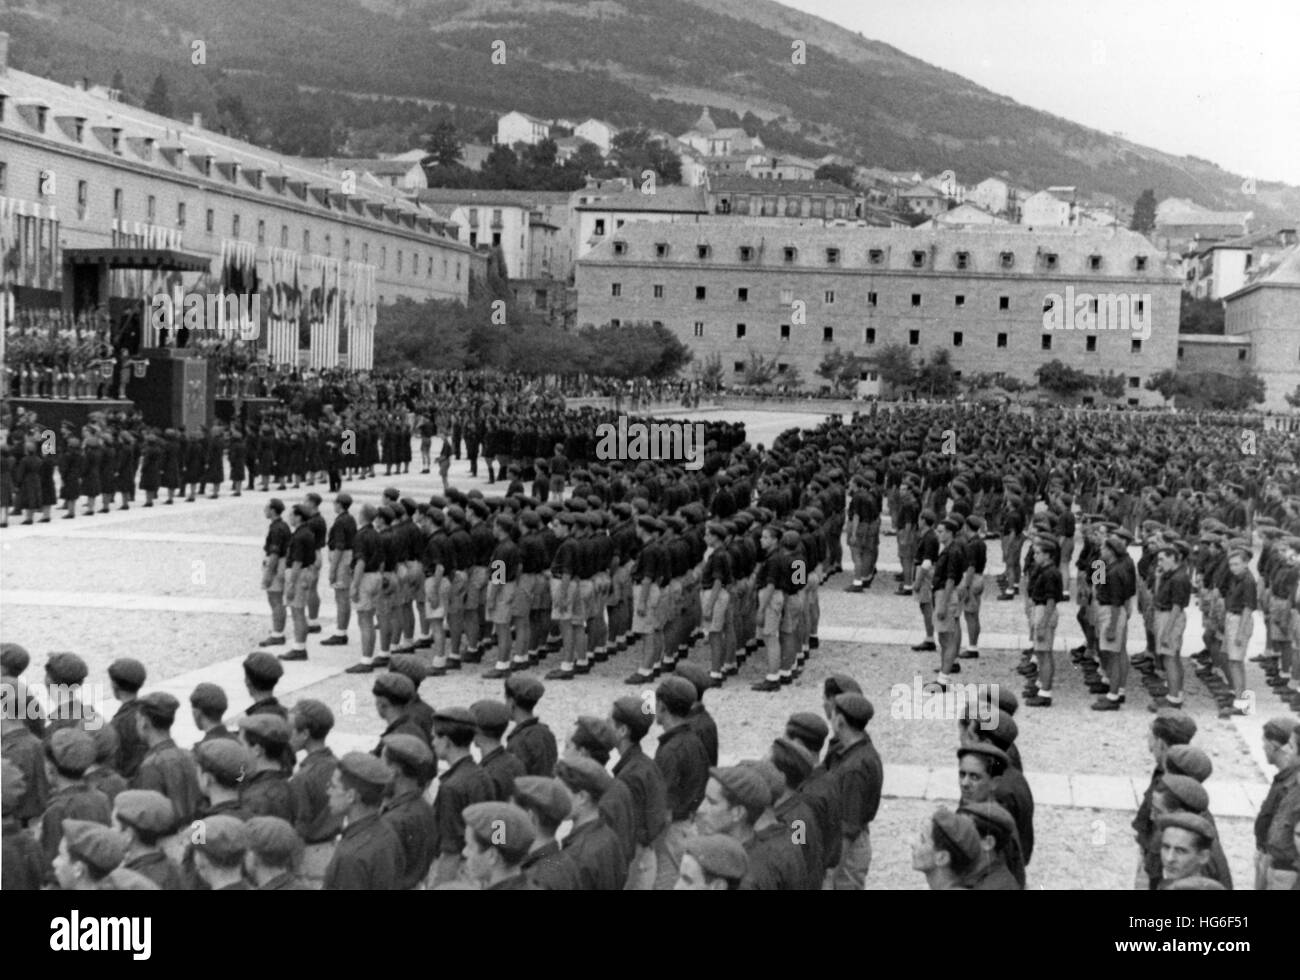 The Nazi propaganda picture shows a march of the fascist Falange Youth Movement in front of Spanish dictator Franco in the royal palace and monastery El Escorial near Madrid, Spain, October 1942. Fotoarchiv für Zeitgeschichtee - NO WIRE SERVICE - | usage worldwide Stock Photo